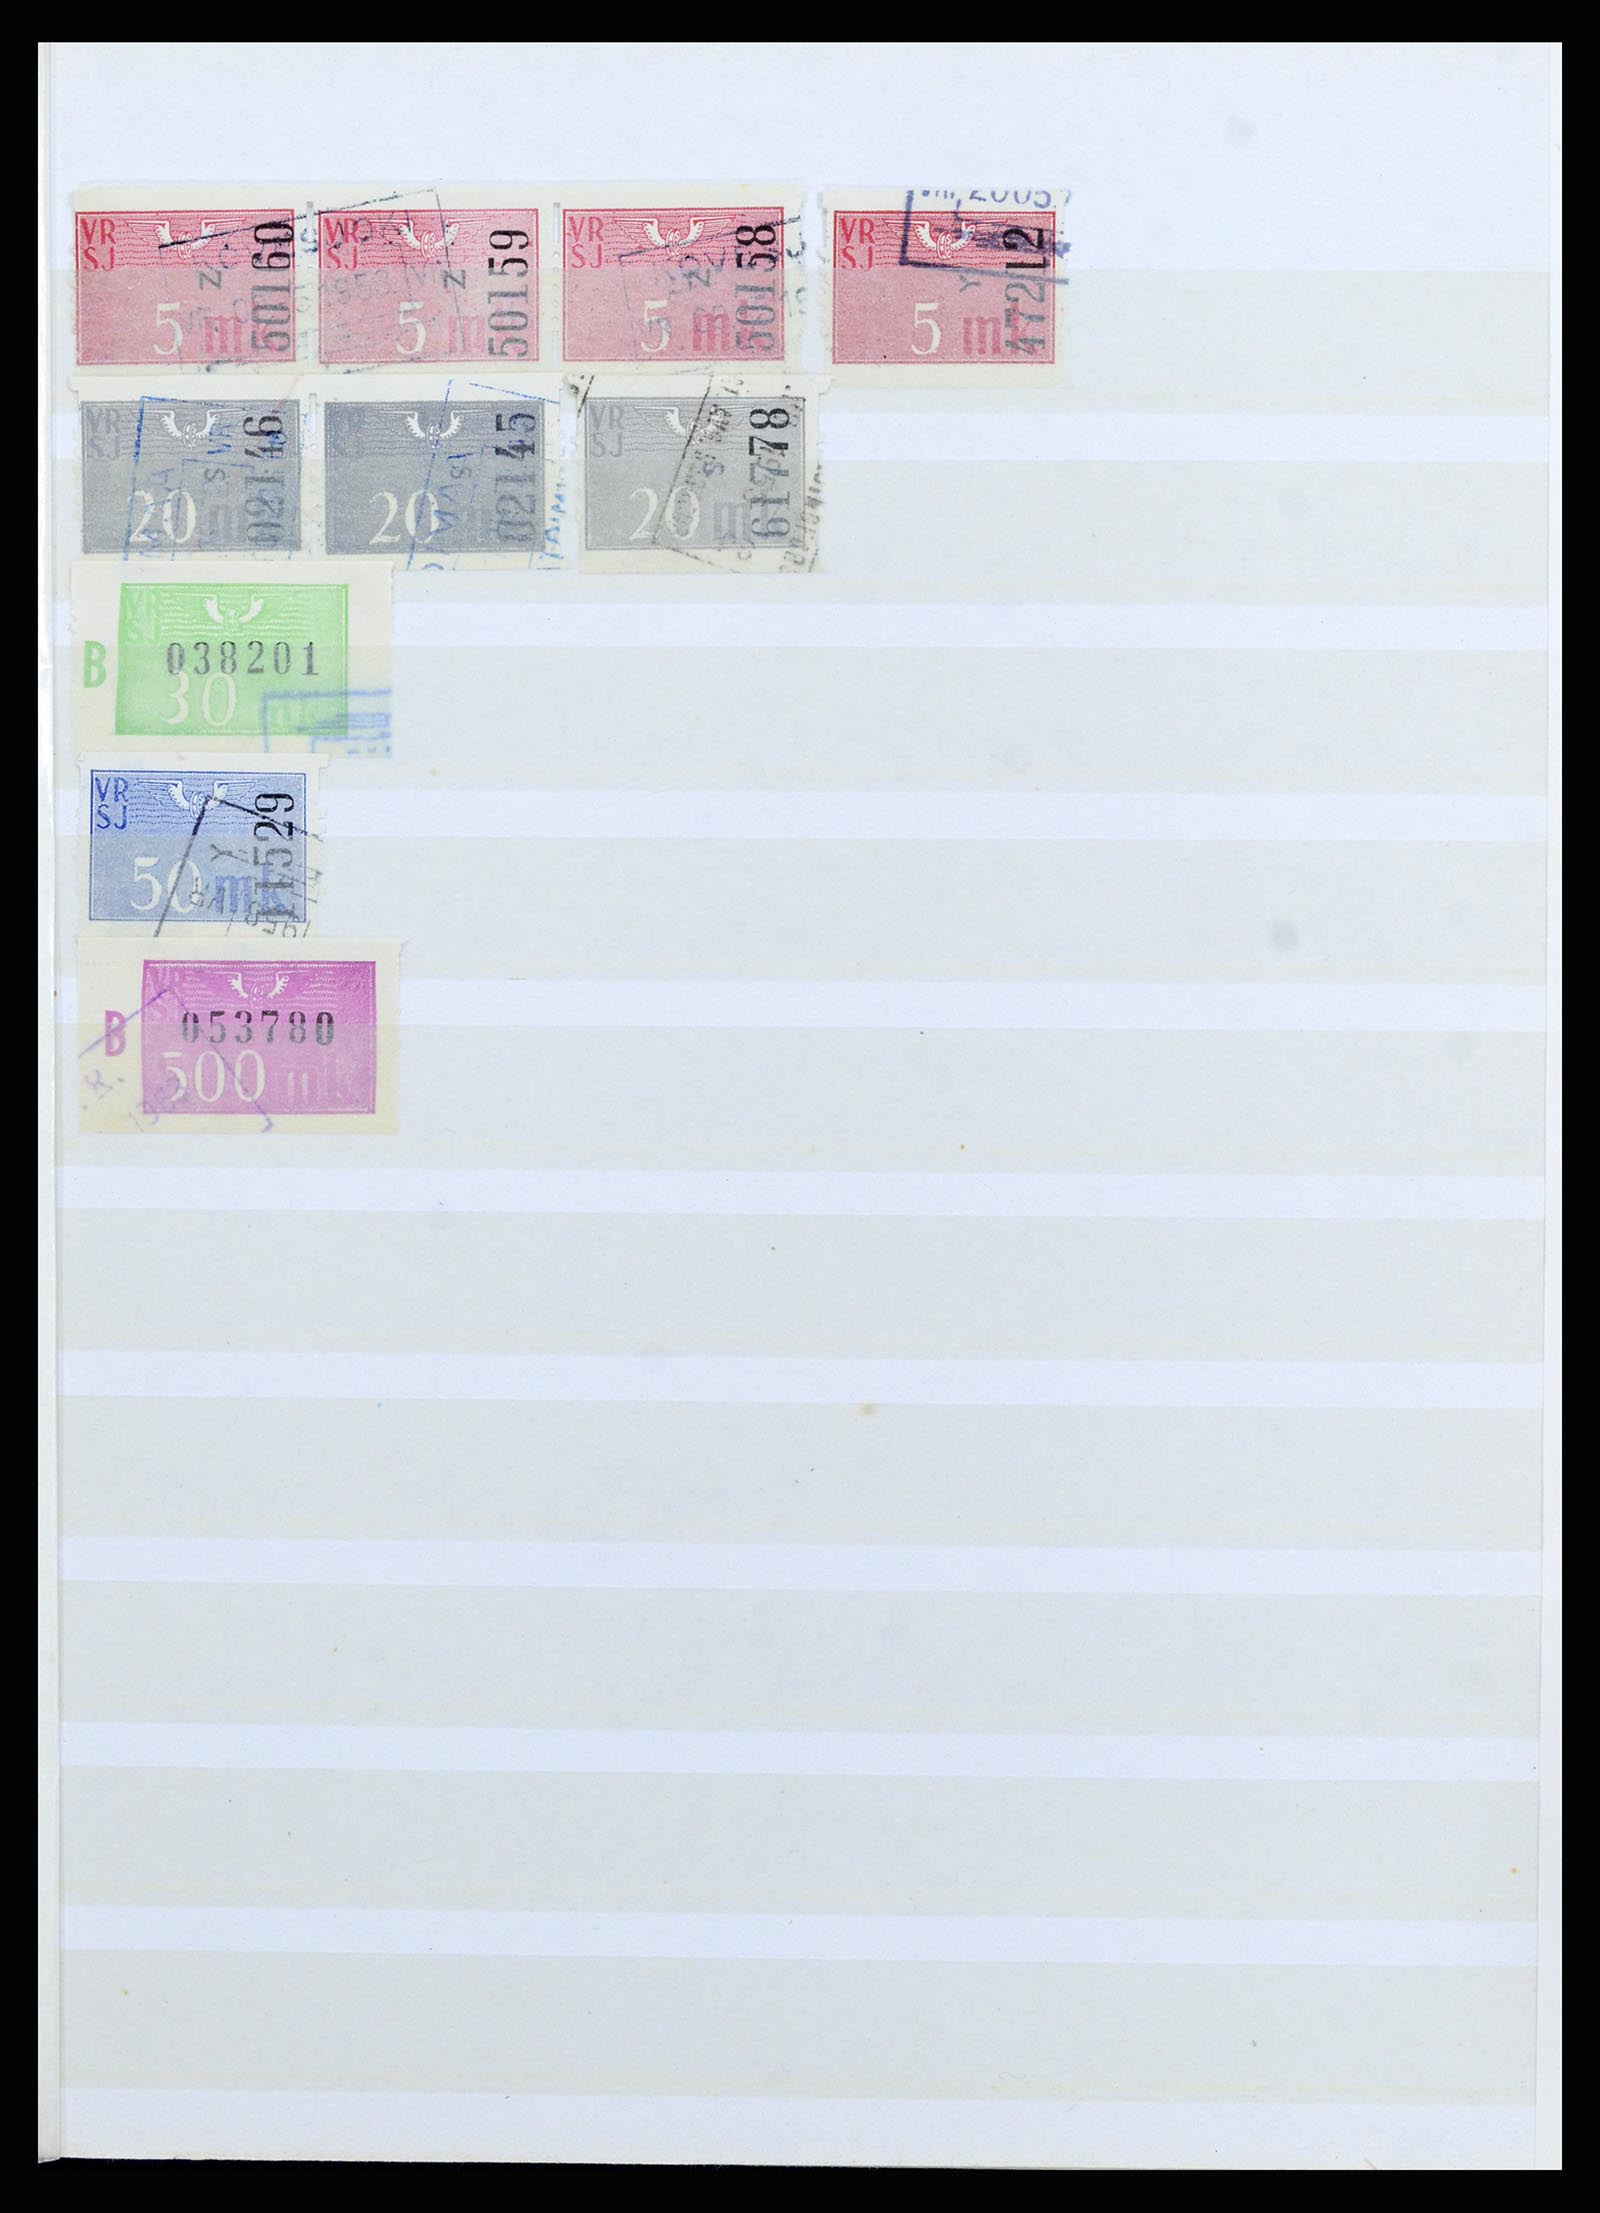 36981 040 - Stamp collection 36981 Scandinavia railroadstamps.